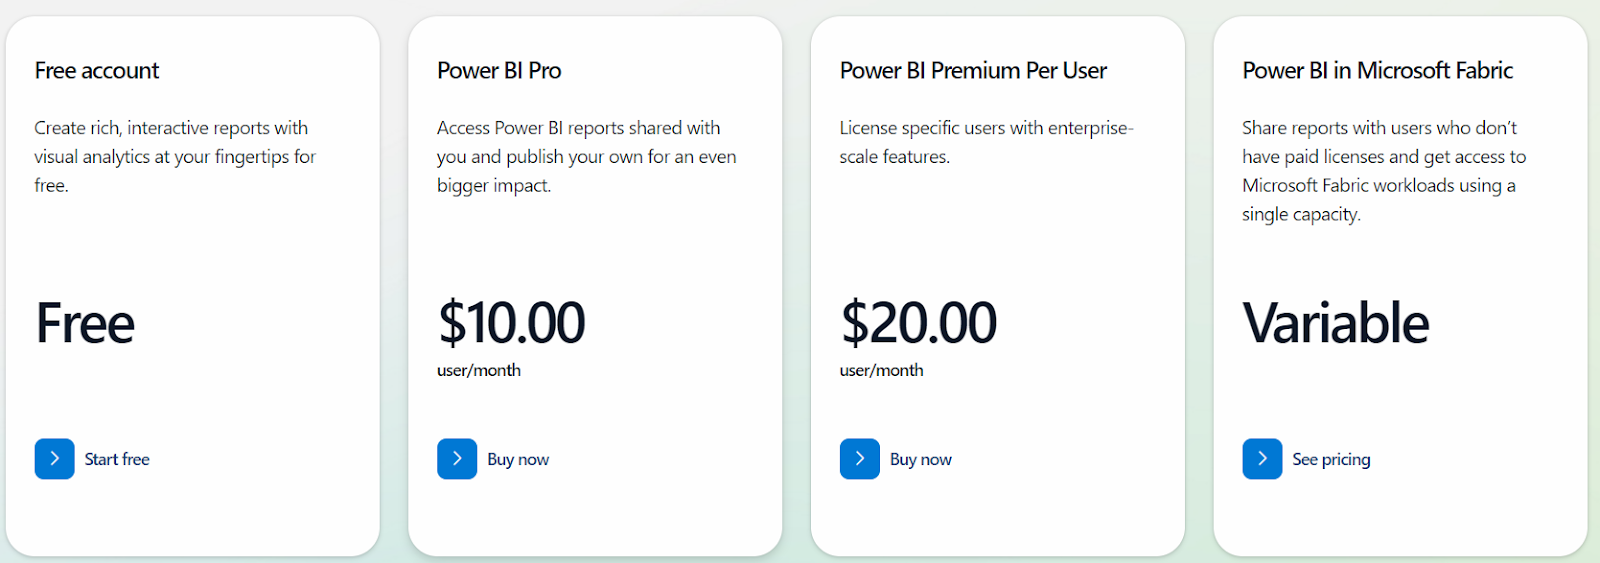 Microsoft Power BI pricing structure and tiers